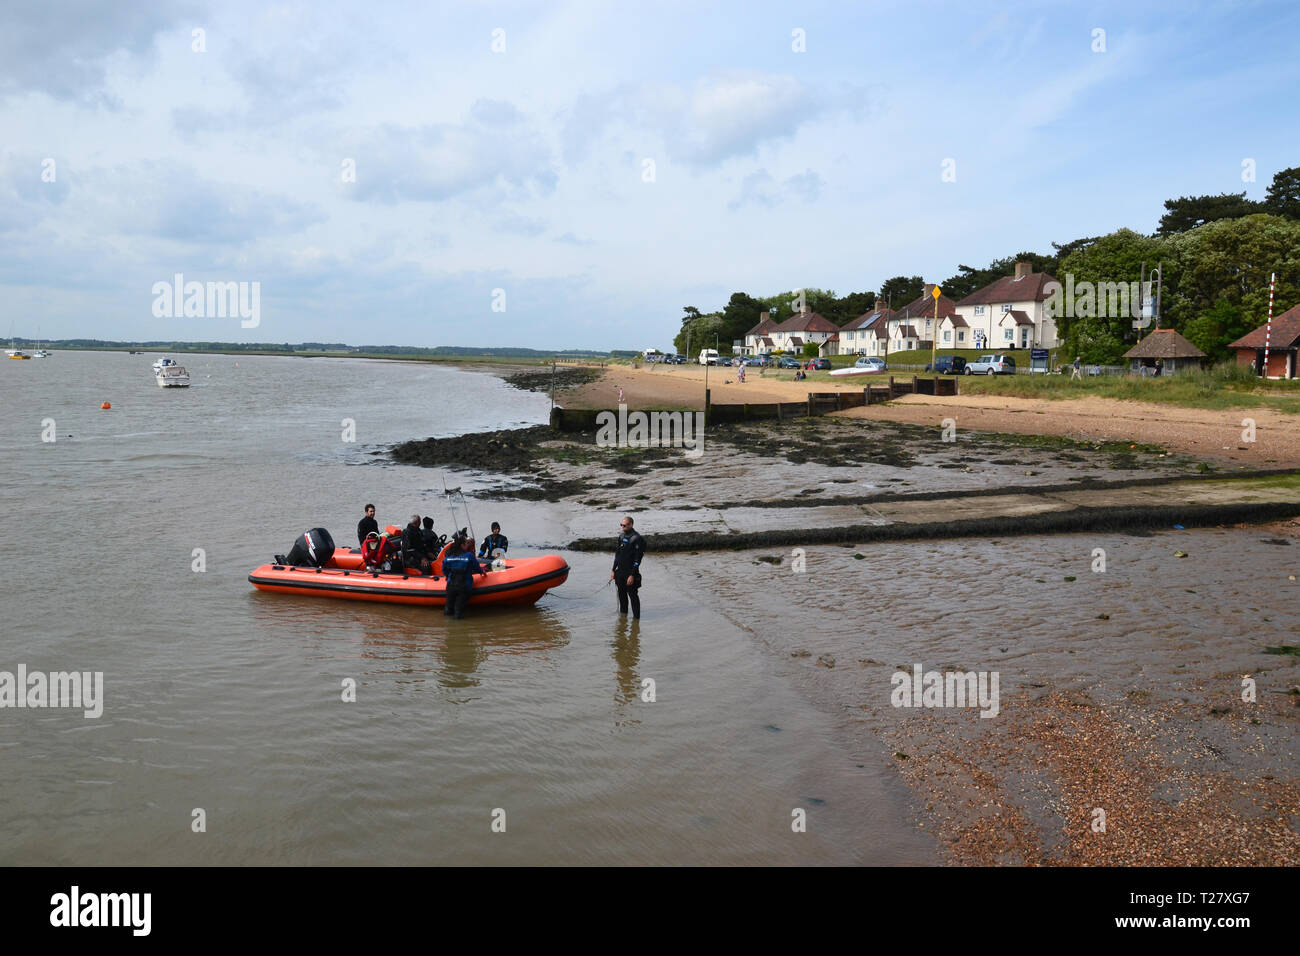 A boat full of people arriving on the beach at Bawdsey, Suffolk, England, UK Stock Photo